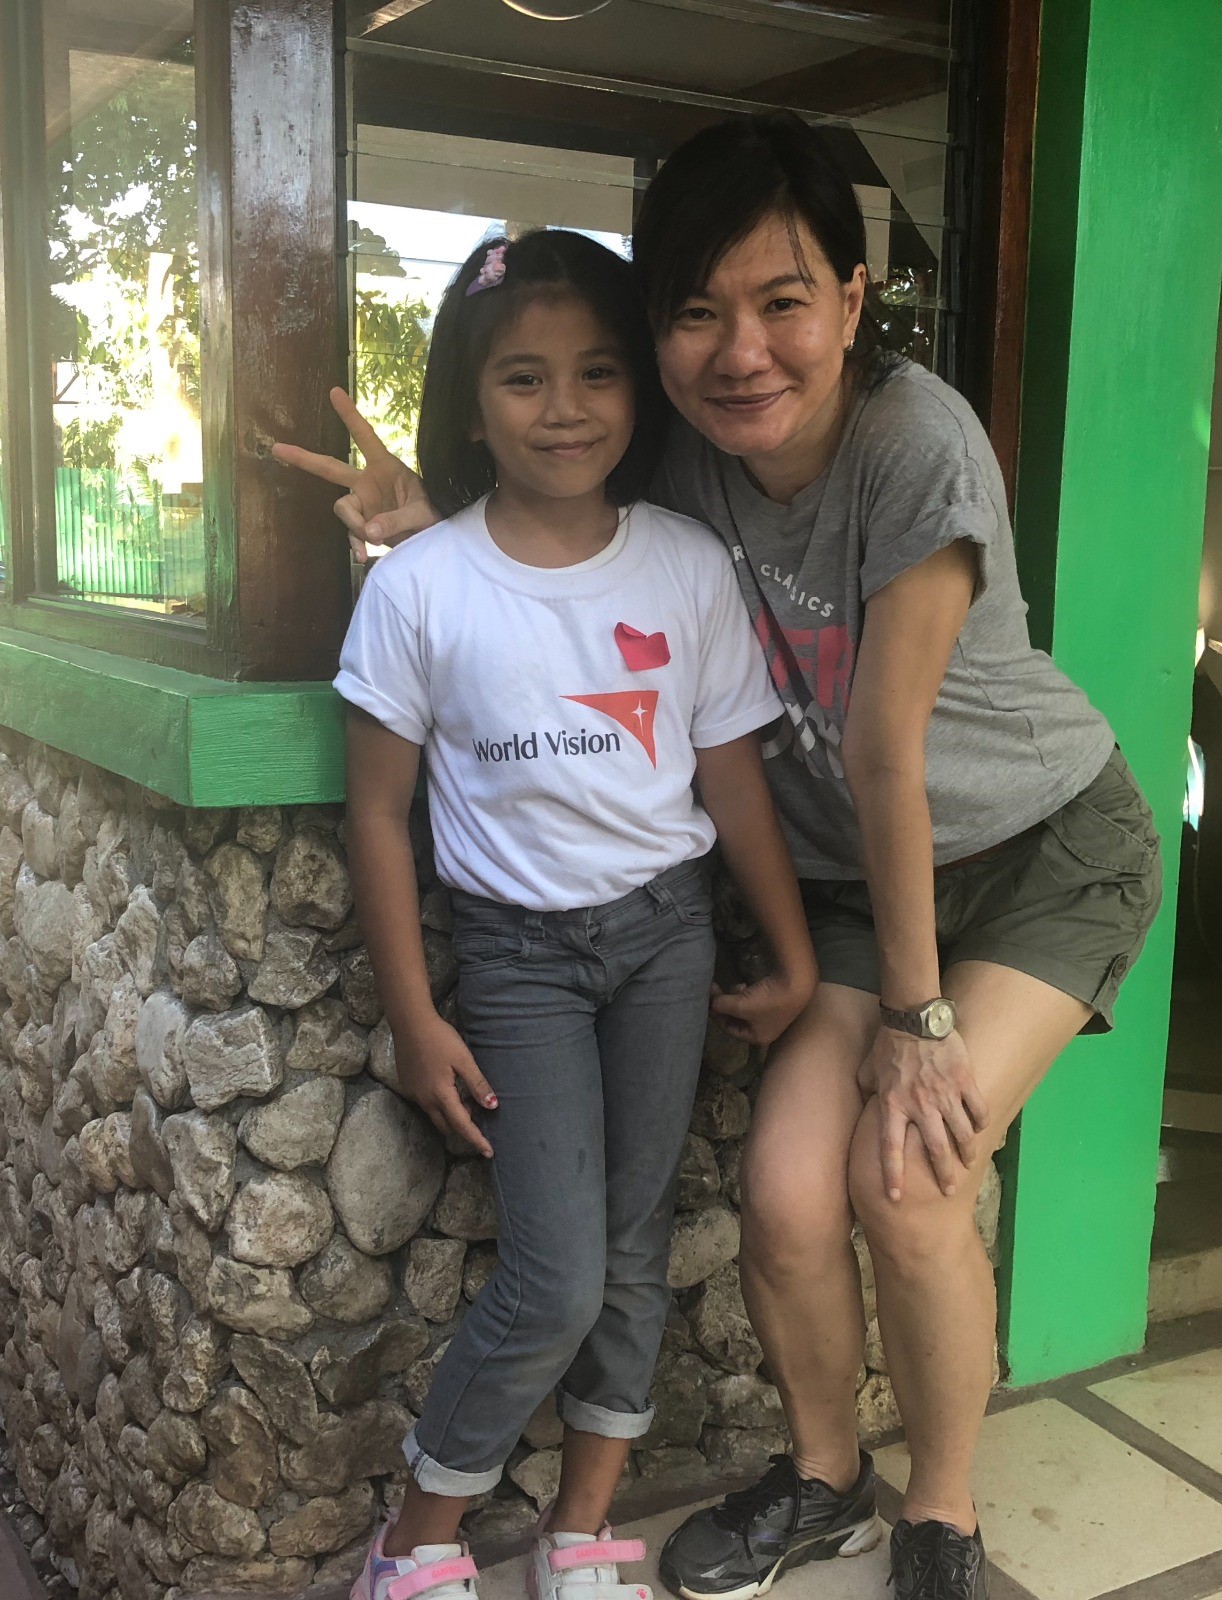 Anna with her sponsored child, Justine Pearl